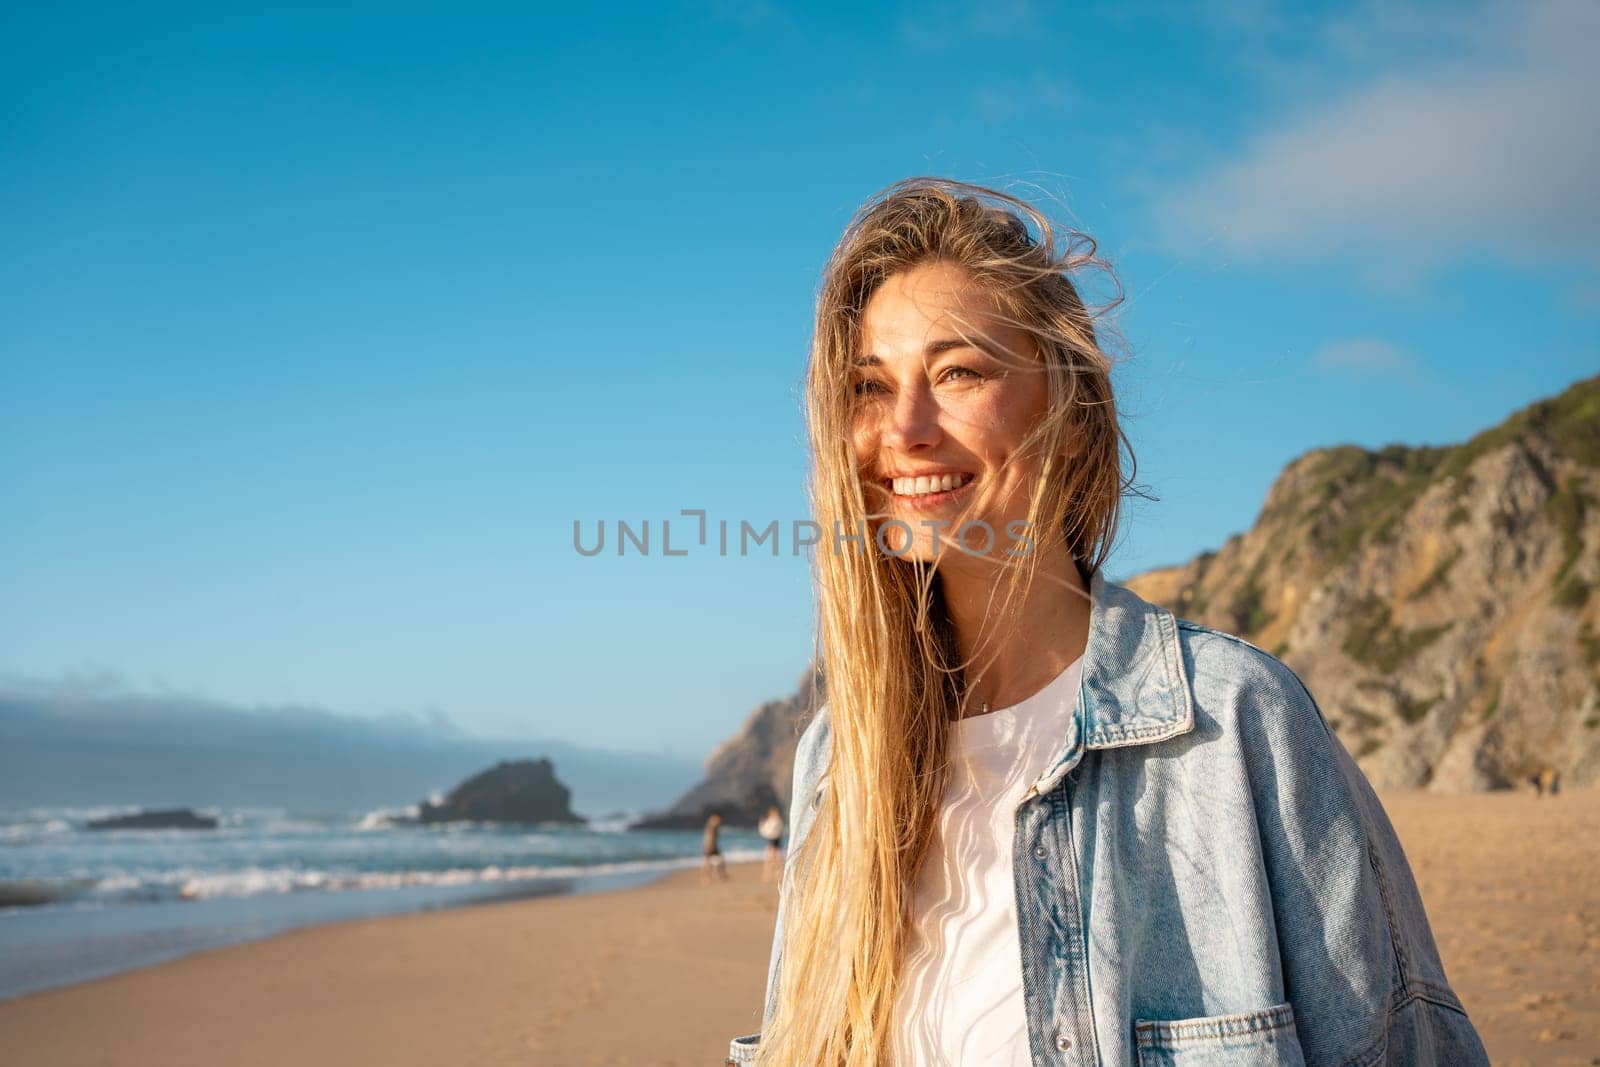 Woman with happy smile on beach. Portrait of female smiling at sea shore with huge rocks on background. Blond woman stand on sandy beach and has radiant smile on her face. Vacation Traveling concept